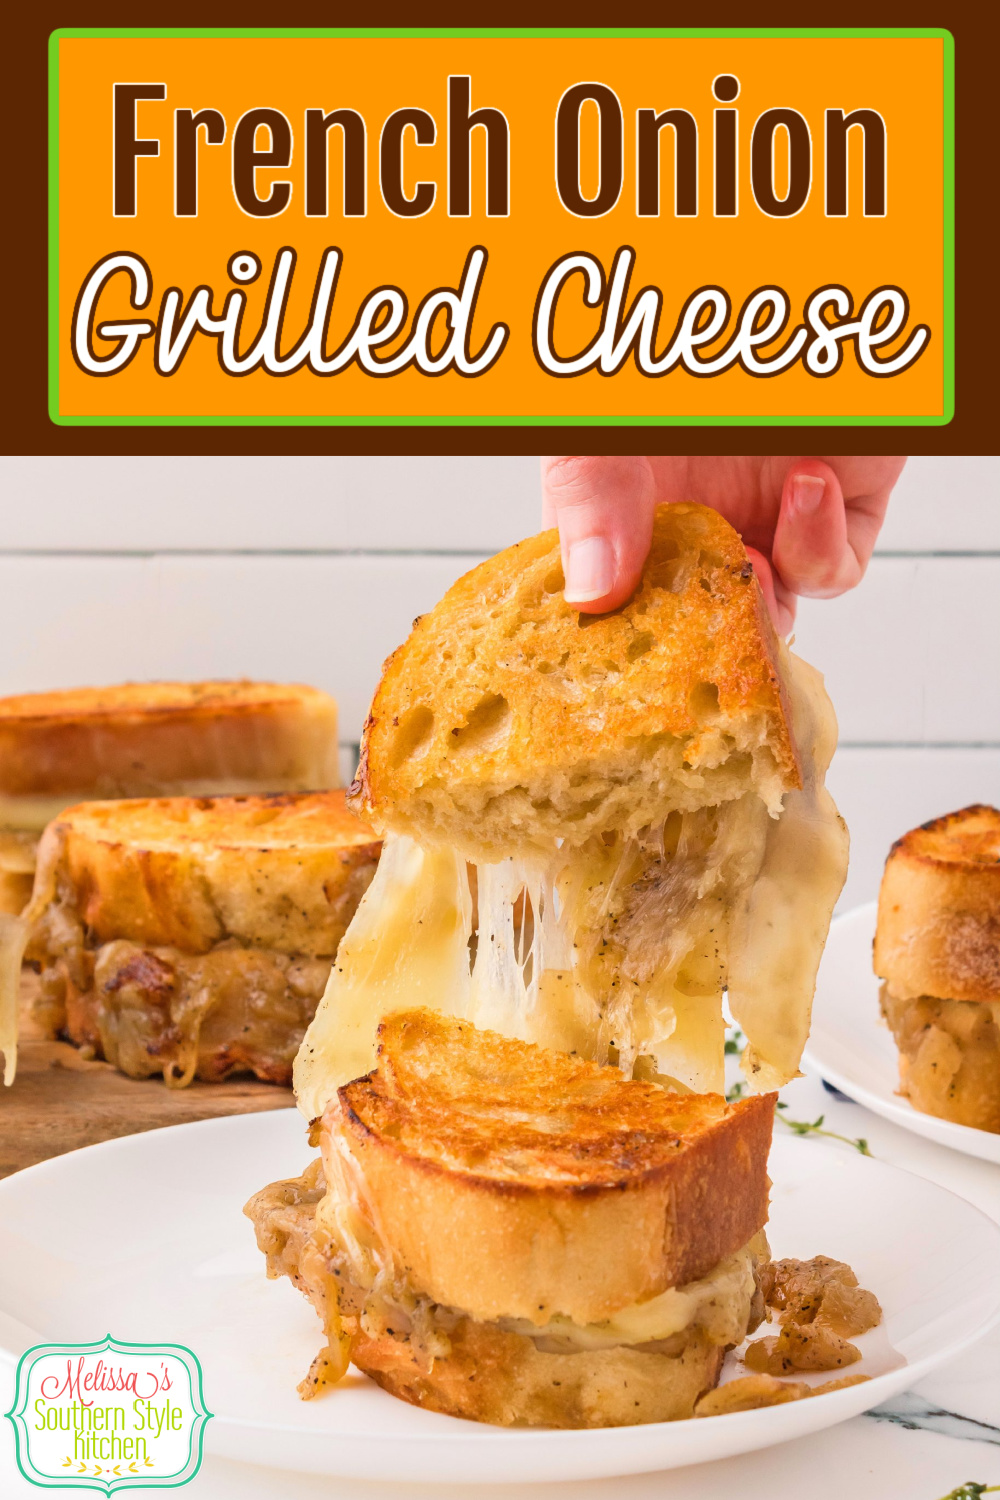 This gooey French Onion Grilled Cheese recipe is served with a bowl of  homemade au jus on the side for dipping #frenchonions #frenchoniongrilledcheese #grilledcheeserecipes #howtomakefrenchonions #aujusrecipe #bestfrenchonionrecipes via @melissasssk